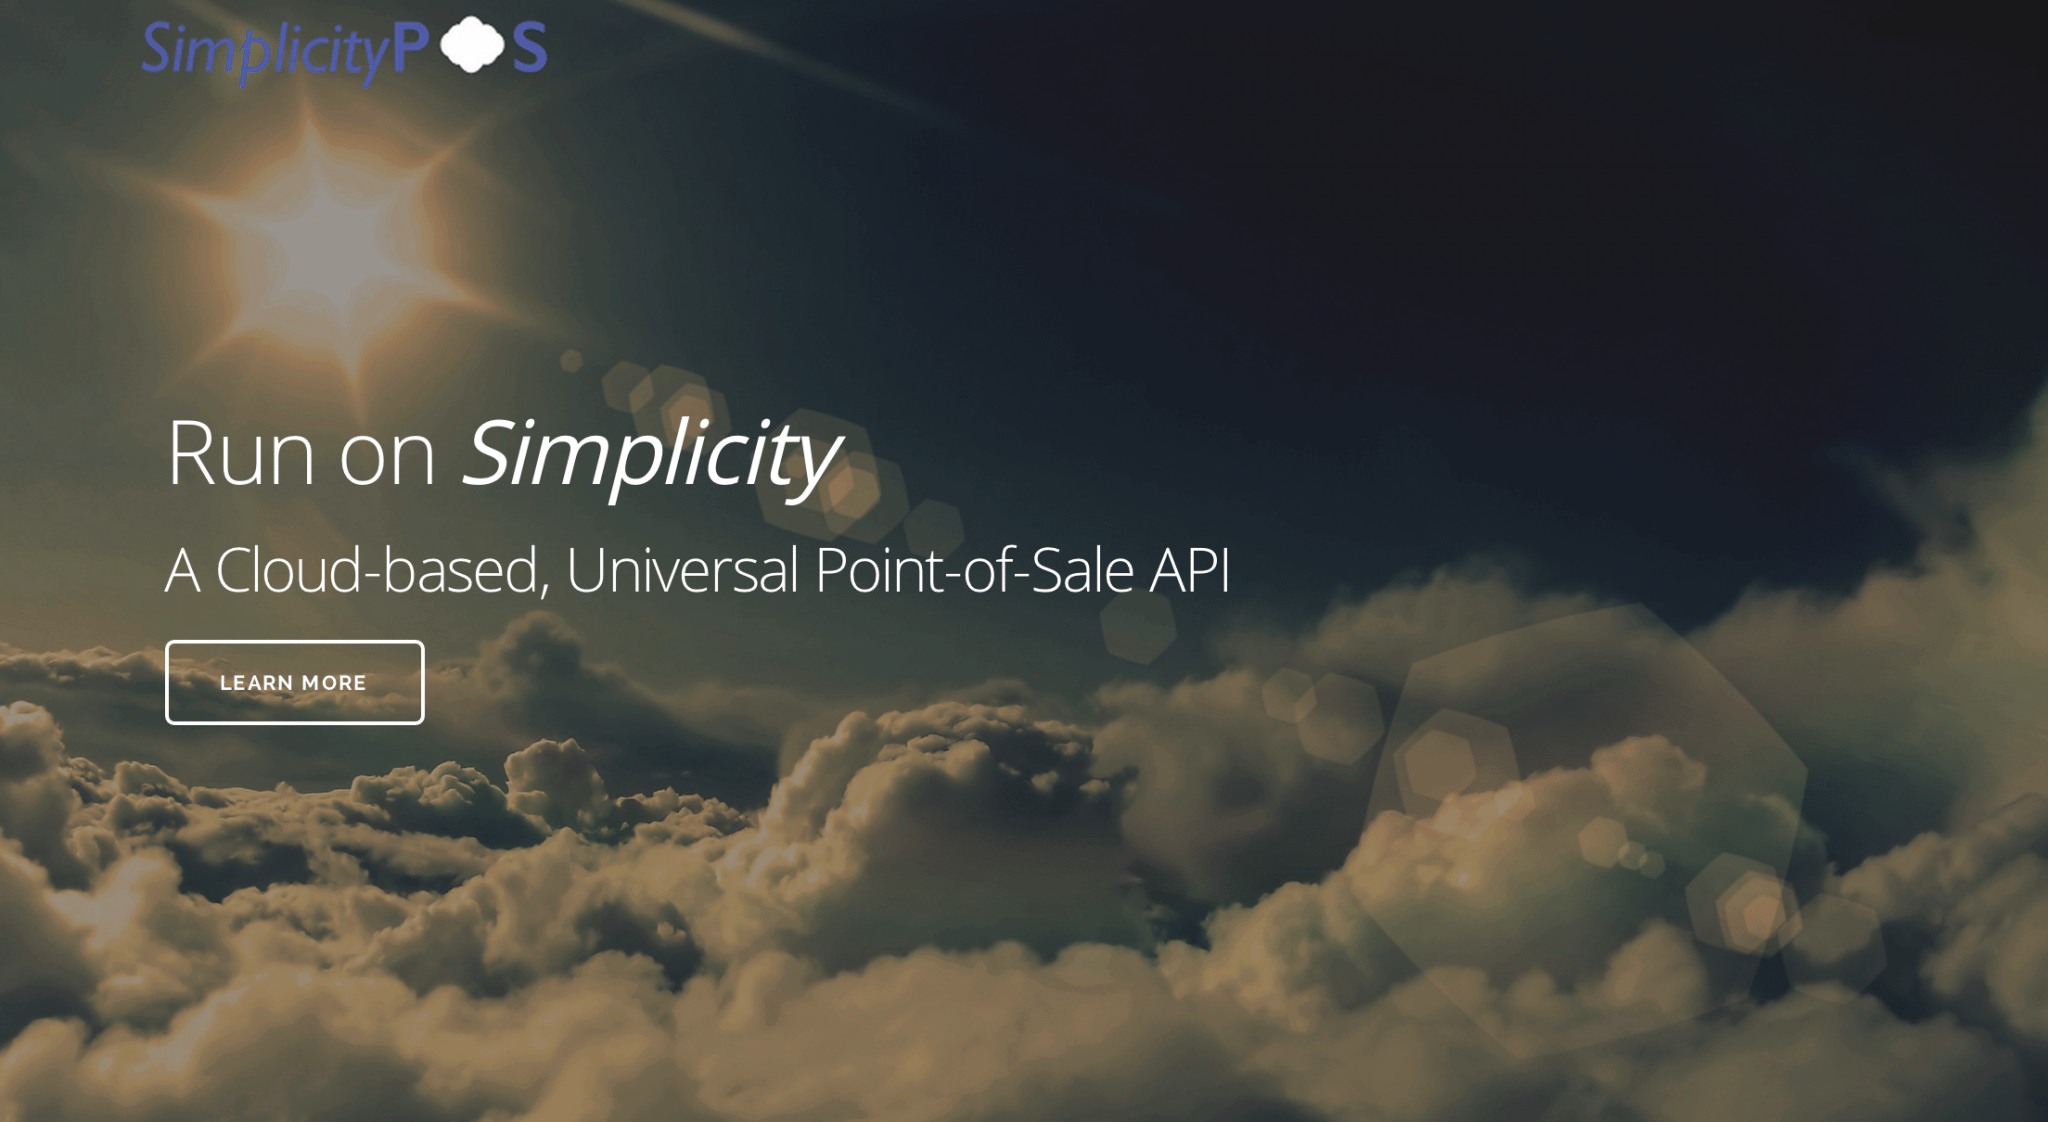 SimplicityPOS is an application program interface for hospitality companies allowing customers to integrate to the point-of-sale for reasons including data consumption and transaction processing.  